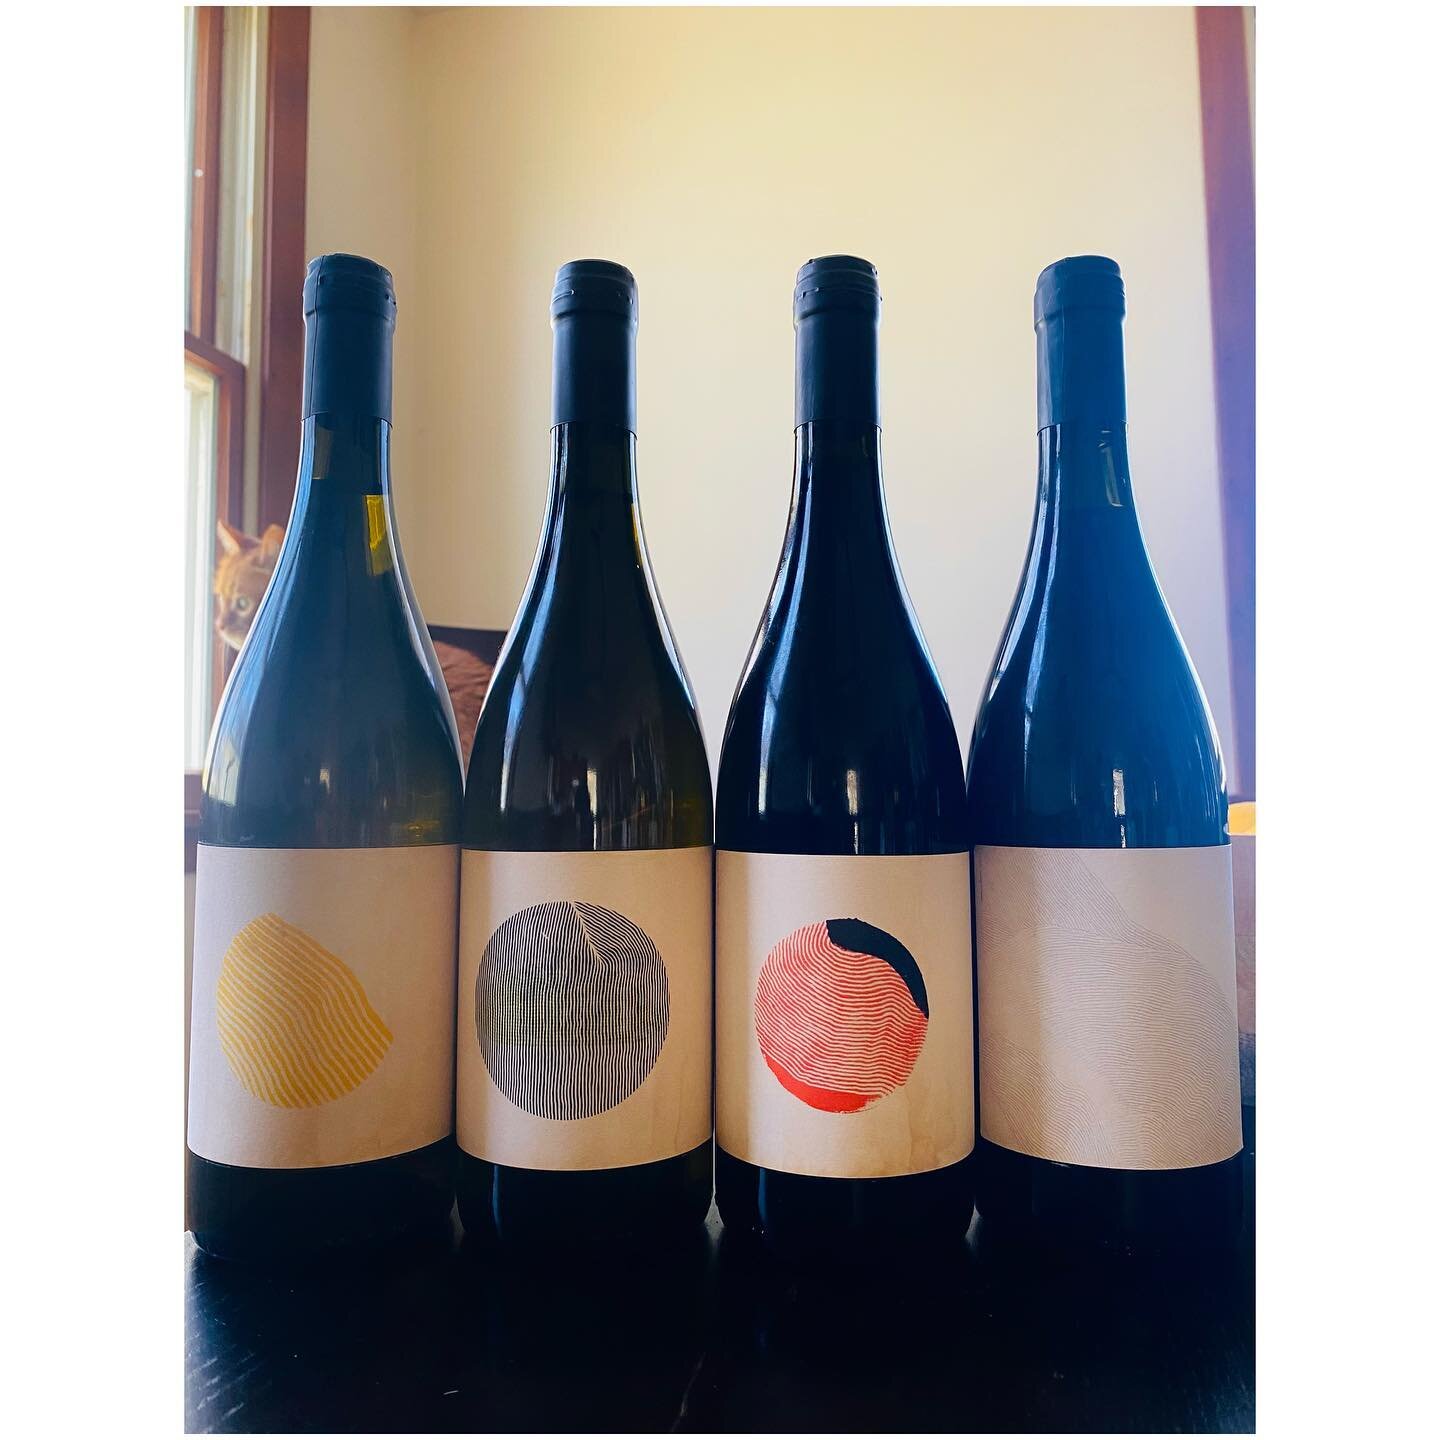 Enter Cascina Barb&agrave;n&hellip;
.
.
.
Today I am honored and humbled to welcome @cascina_barban to the SelectioNaturel family. When I started SN well over a decade ago (yeesh!) my goal was to turn over all the stones around Italy and find amazing